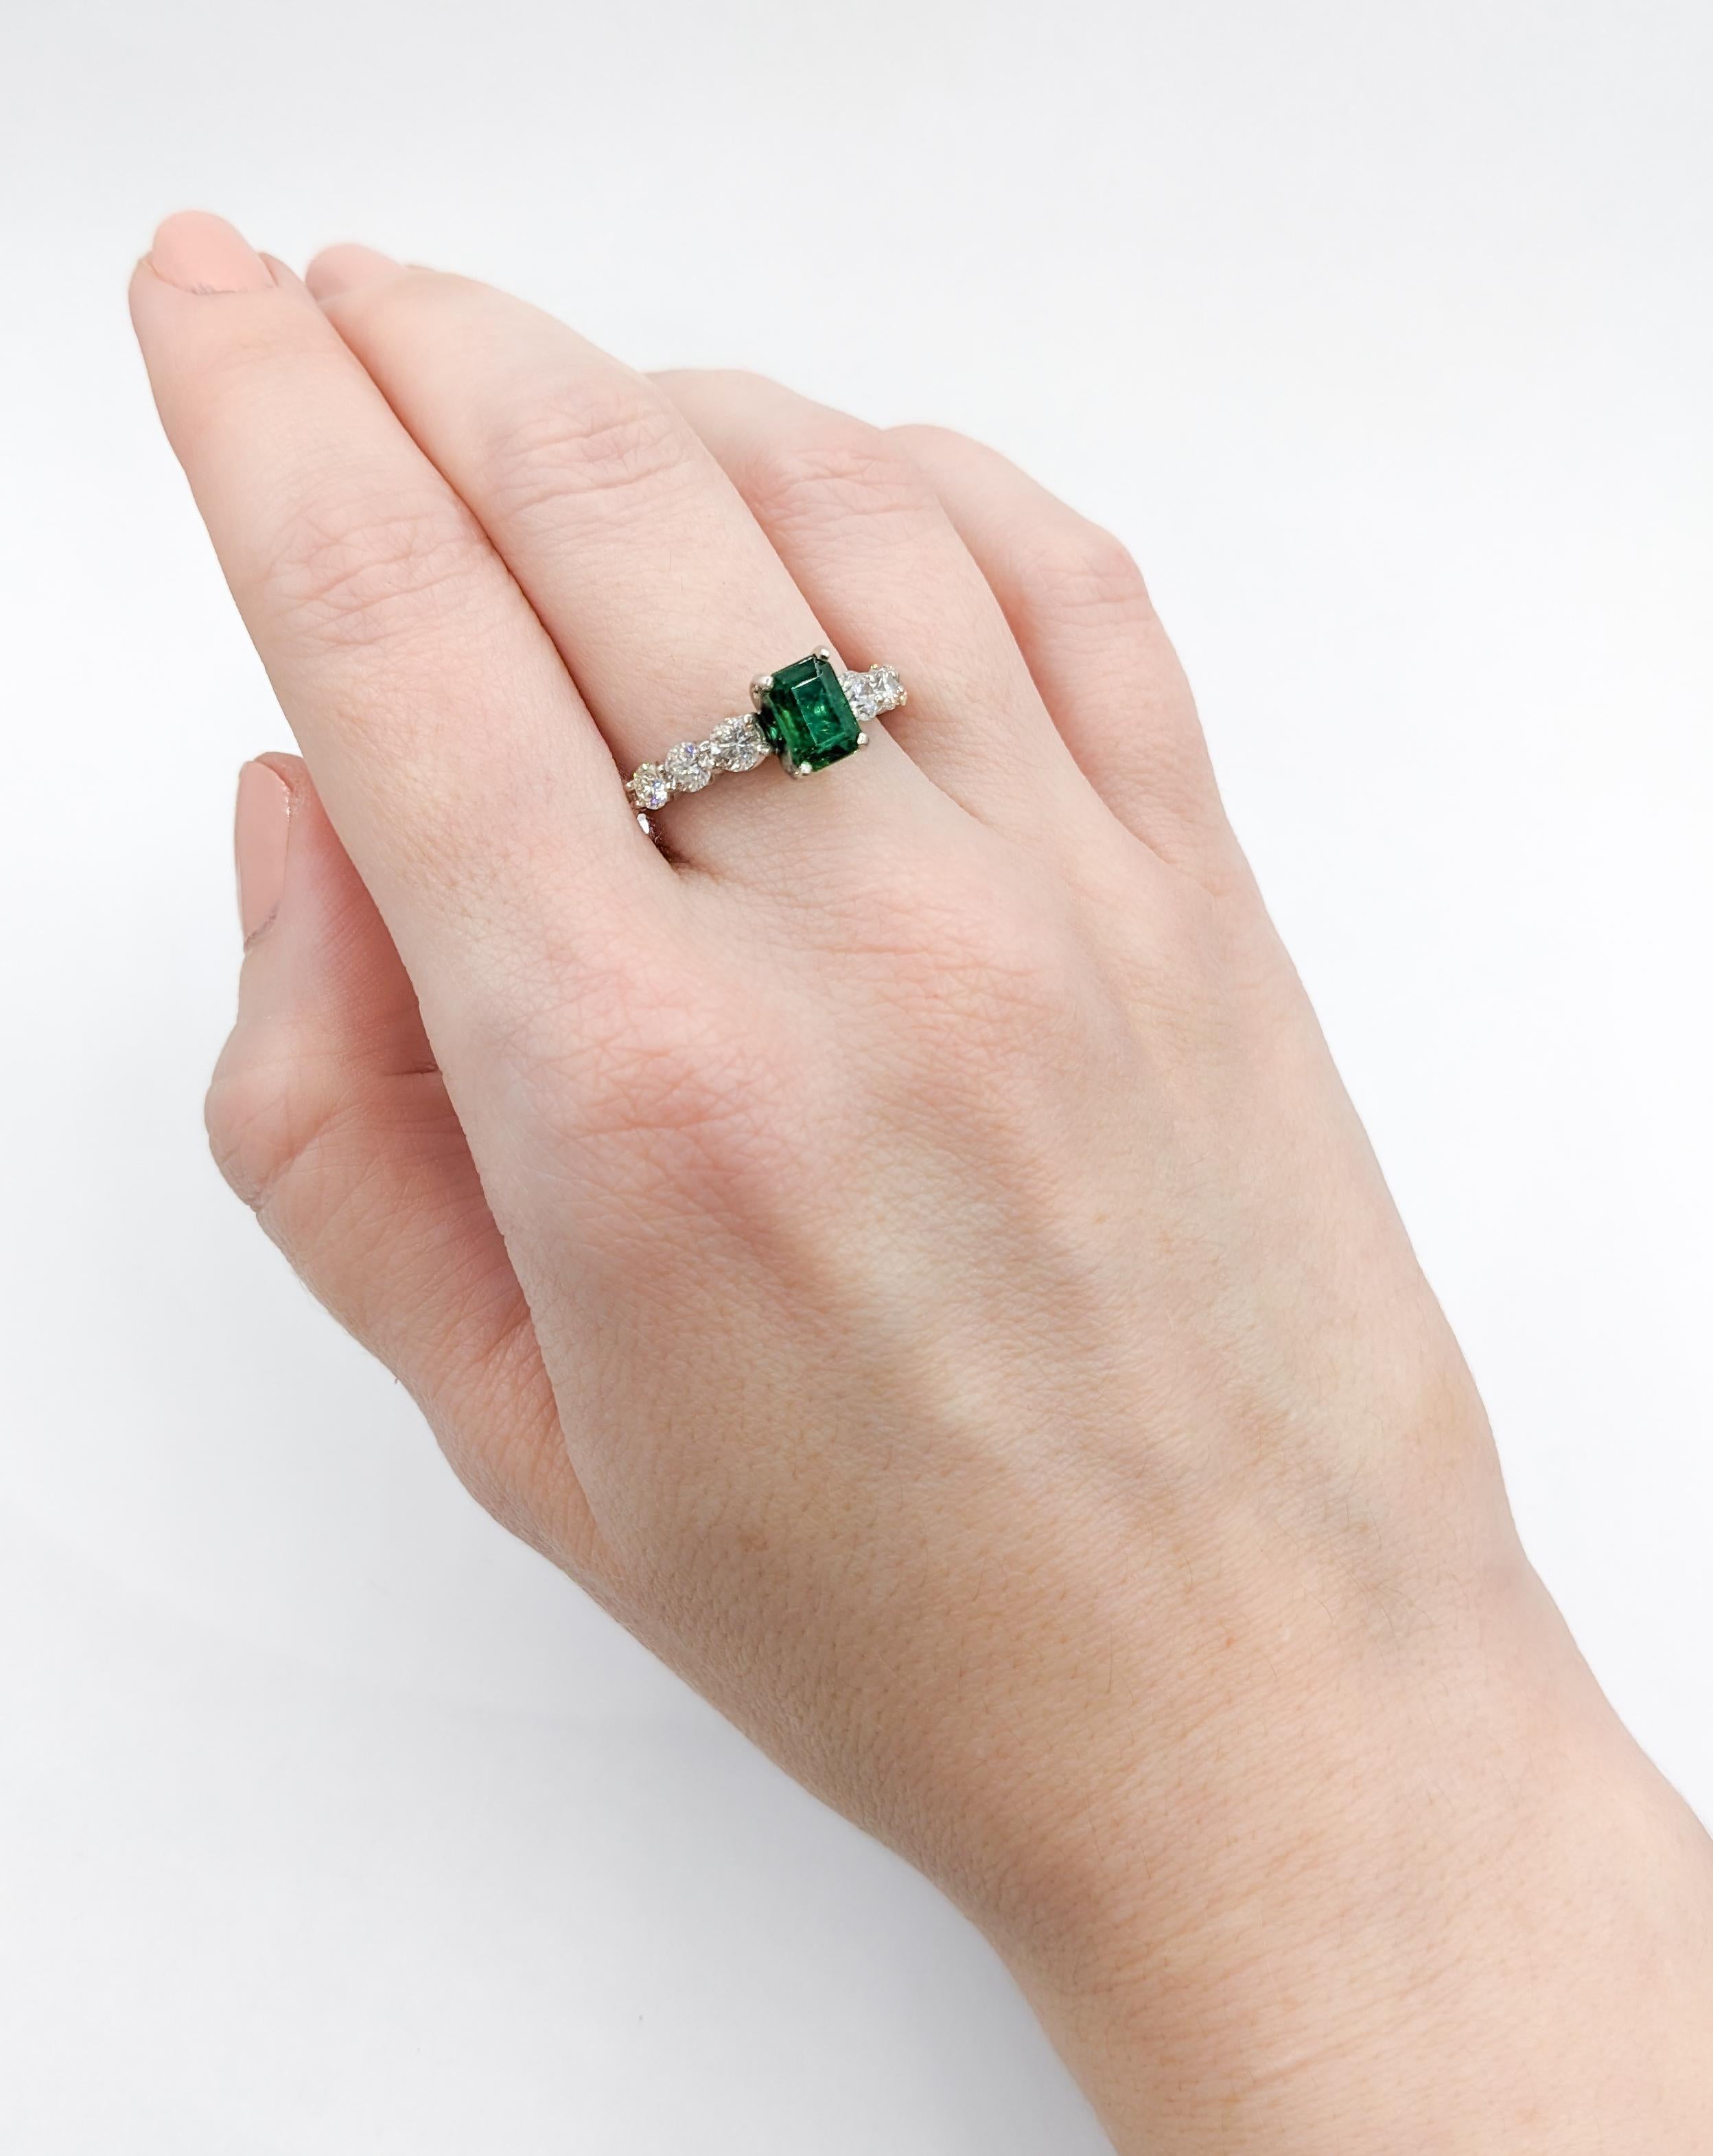 Stunning Emerald and Graduated Diamond Ring in 14K White Gold For Sale 4